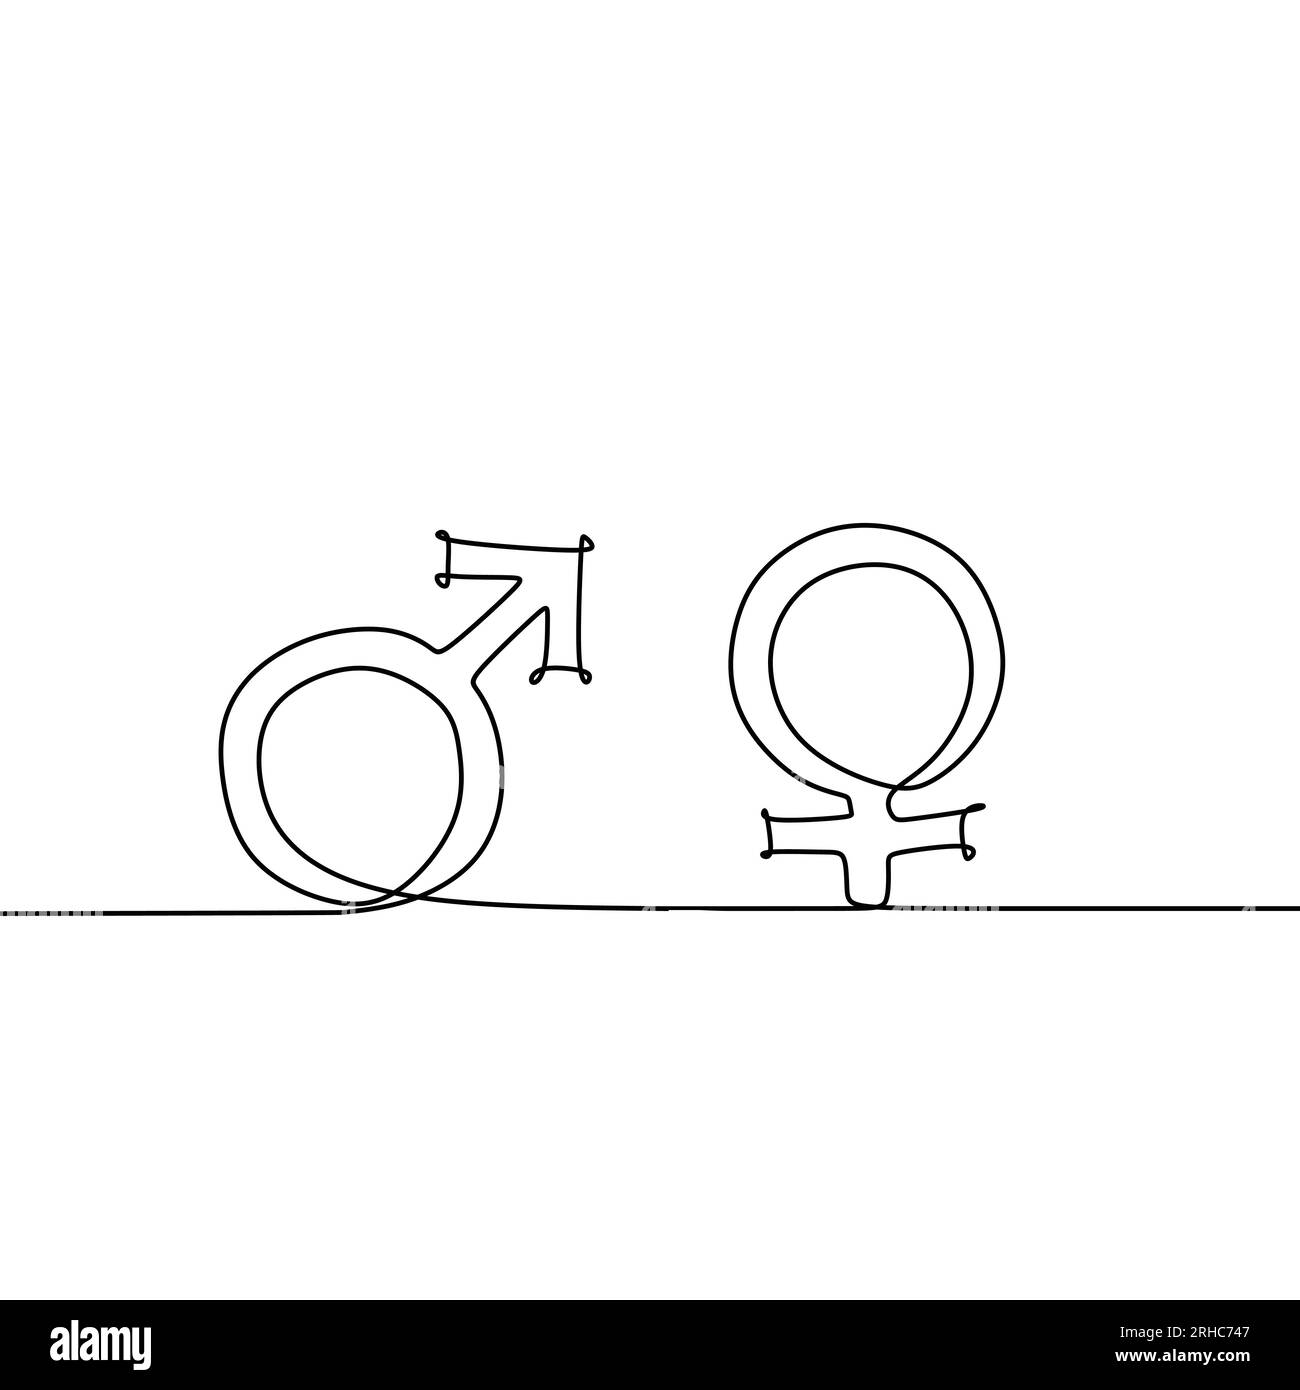 Male and female symbol continuous line drawing vector illustration. Concept of gender sign. Stock Vector